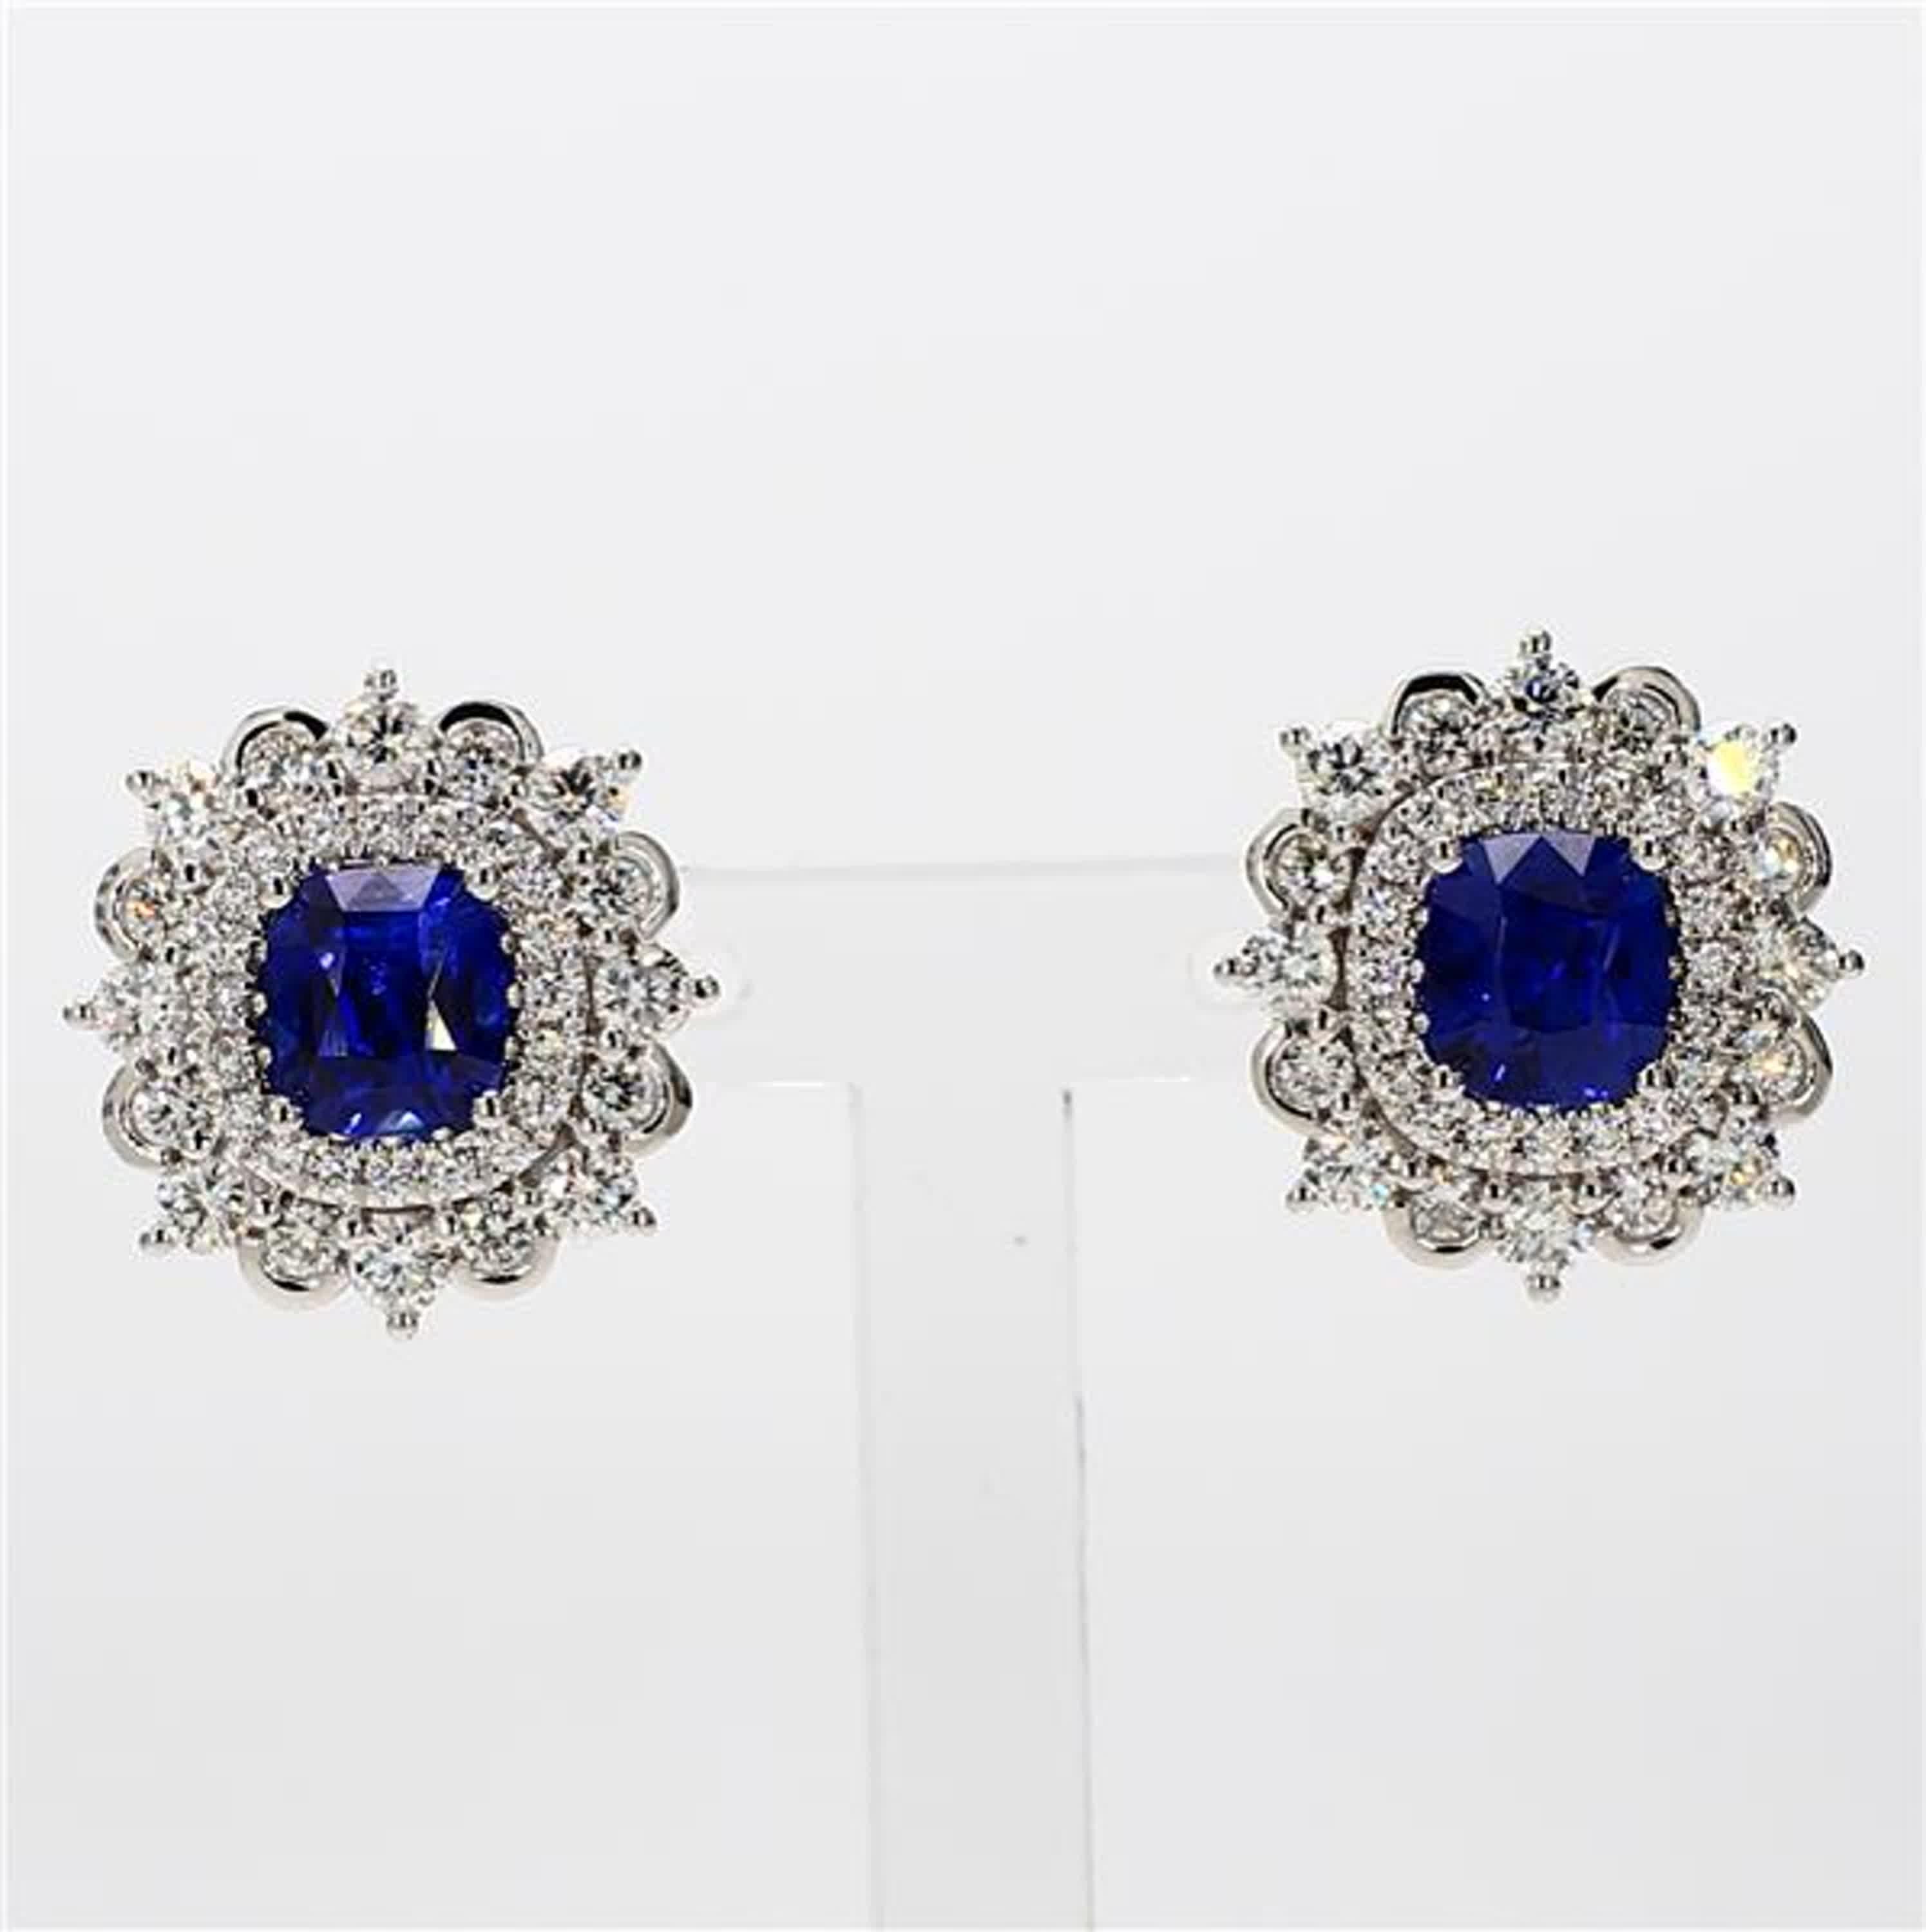 RareGemWorld's classic sapphire earrings. Mounted in a beautiful 18K White Gold setting with natural cushion cut blue sapphires. The sapphires are surrounded by natural round white diamond melee. These earrings are guaranteed to impress and enhance